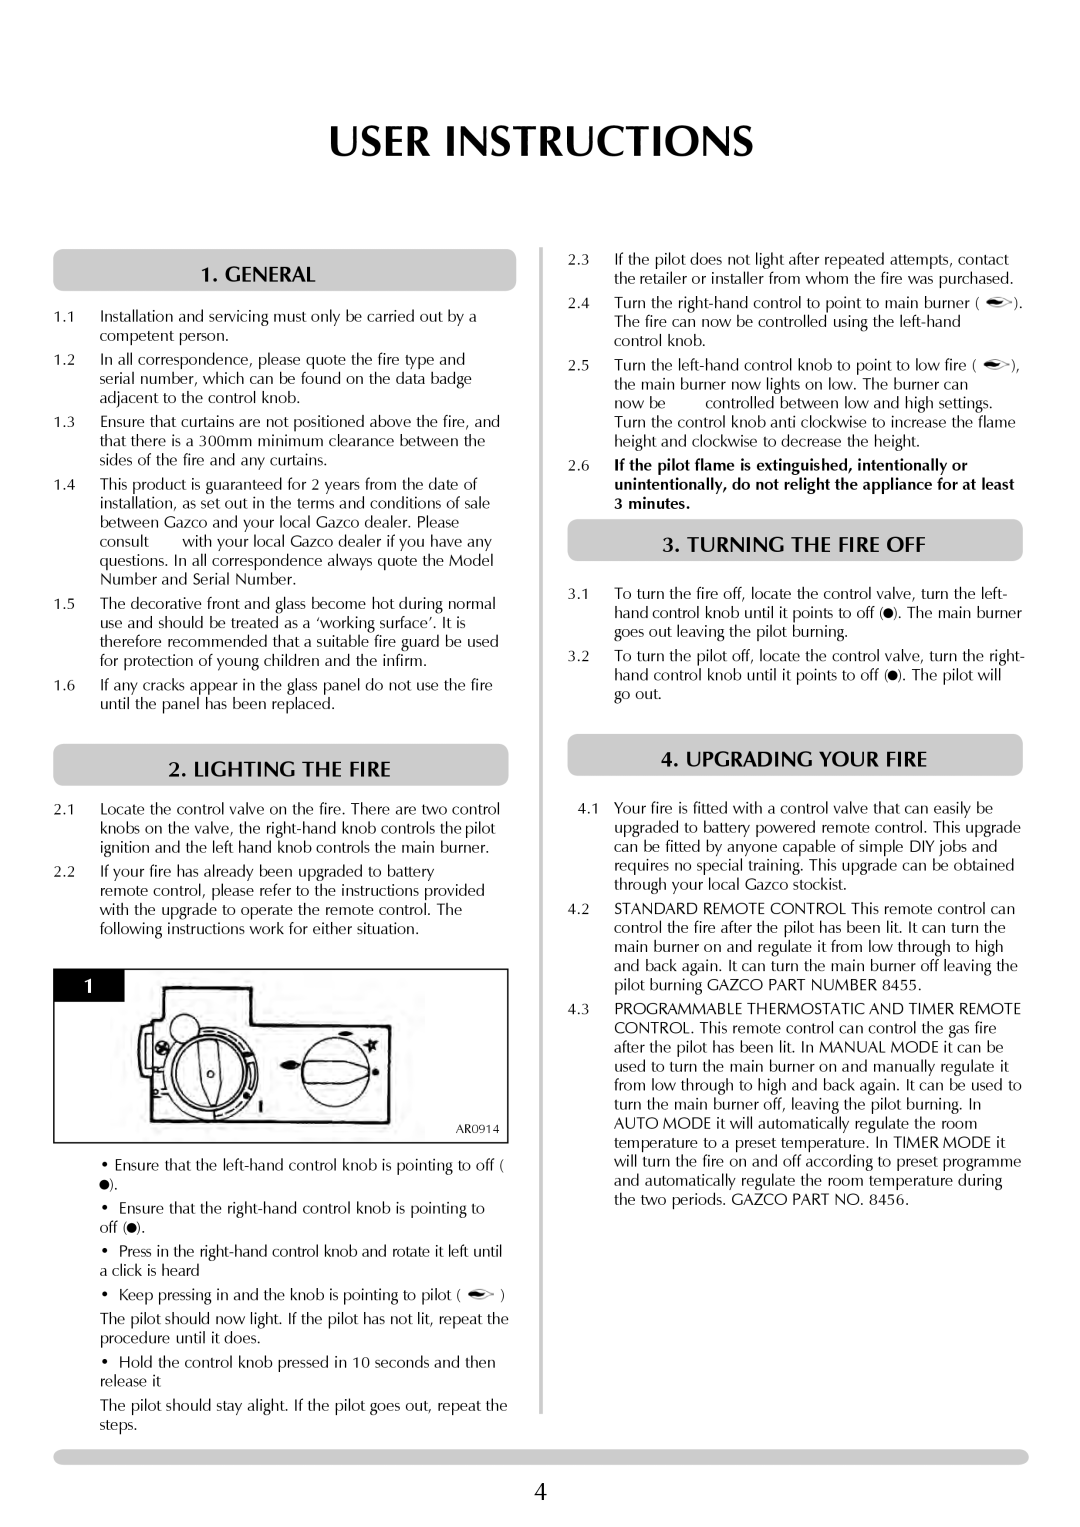 Stovax PR0741 manual User Instructions, general, Lighting The Fire, Turning The Fire Off, upgrading your fire 